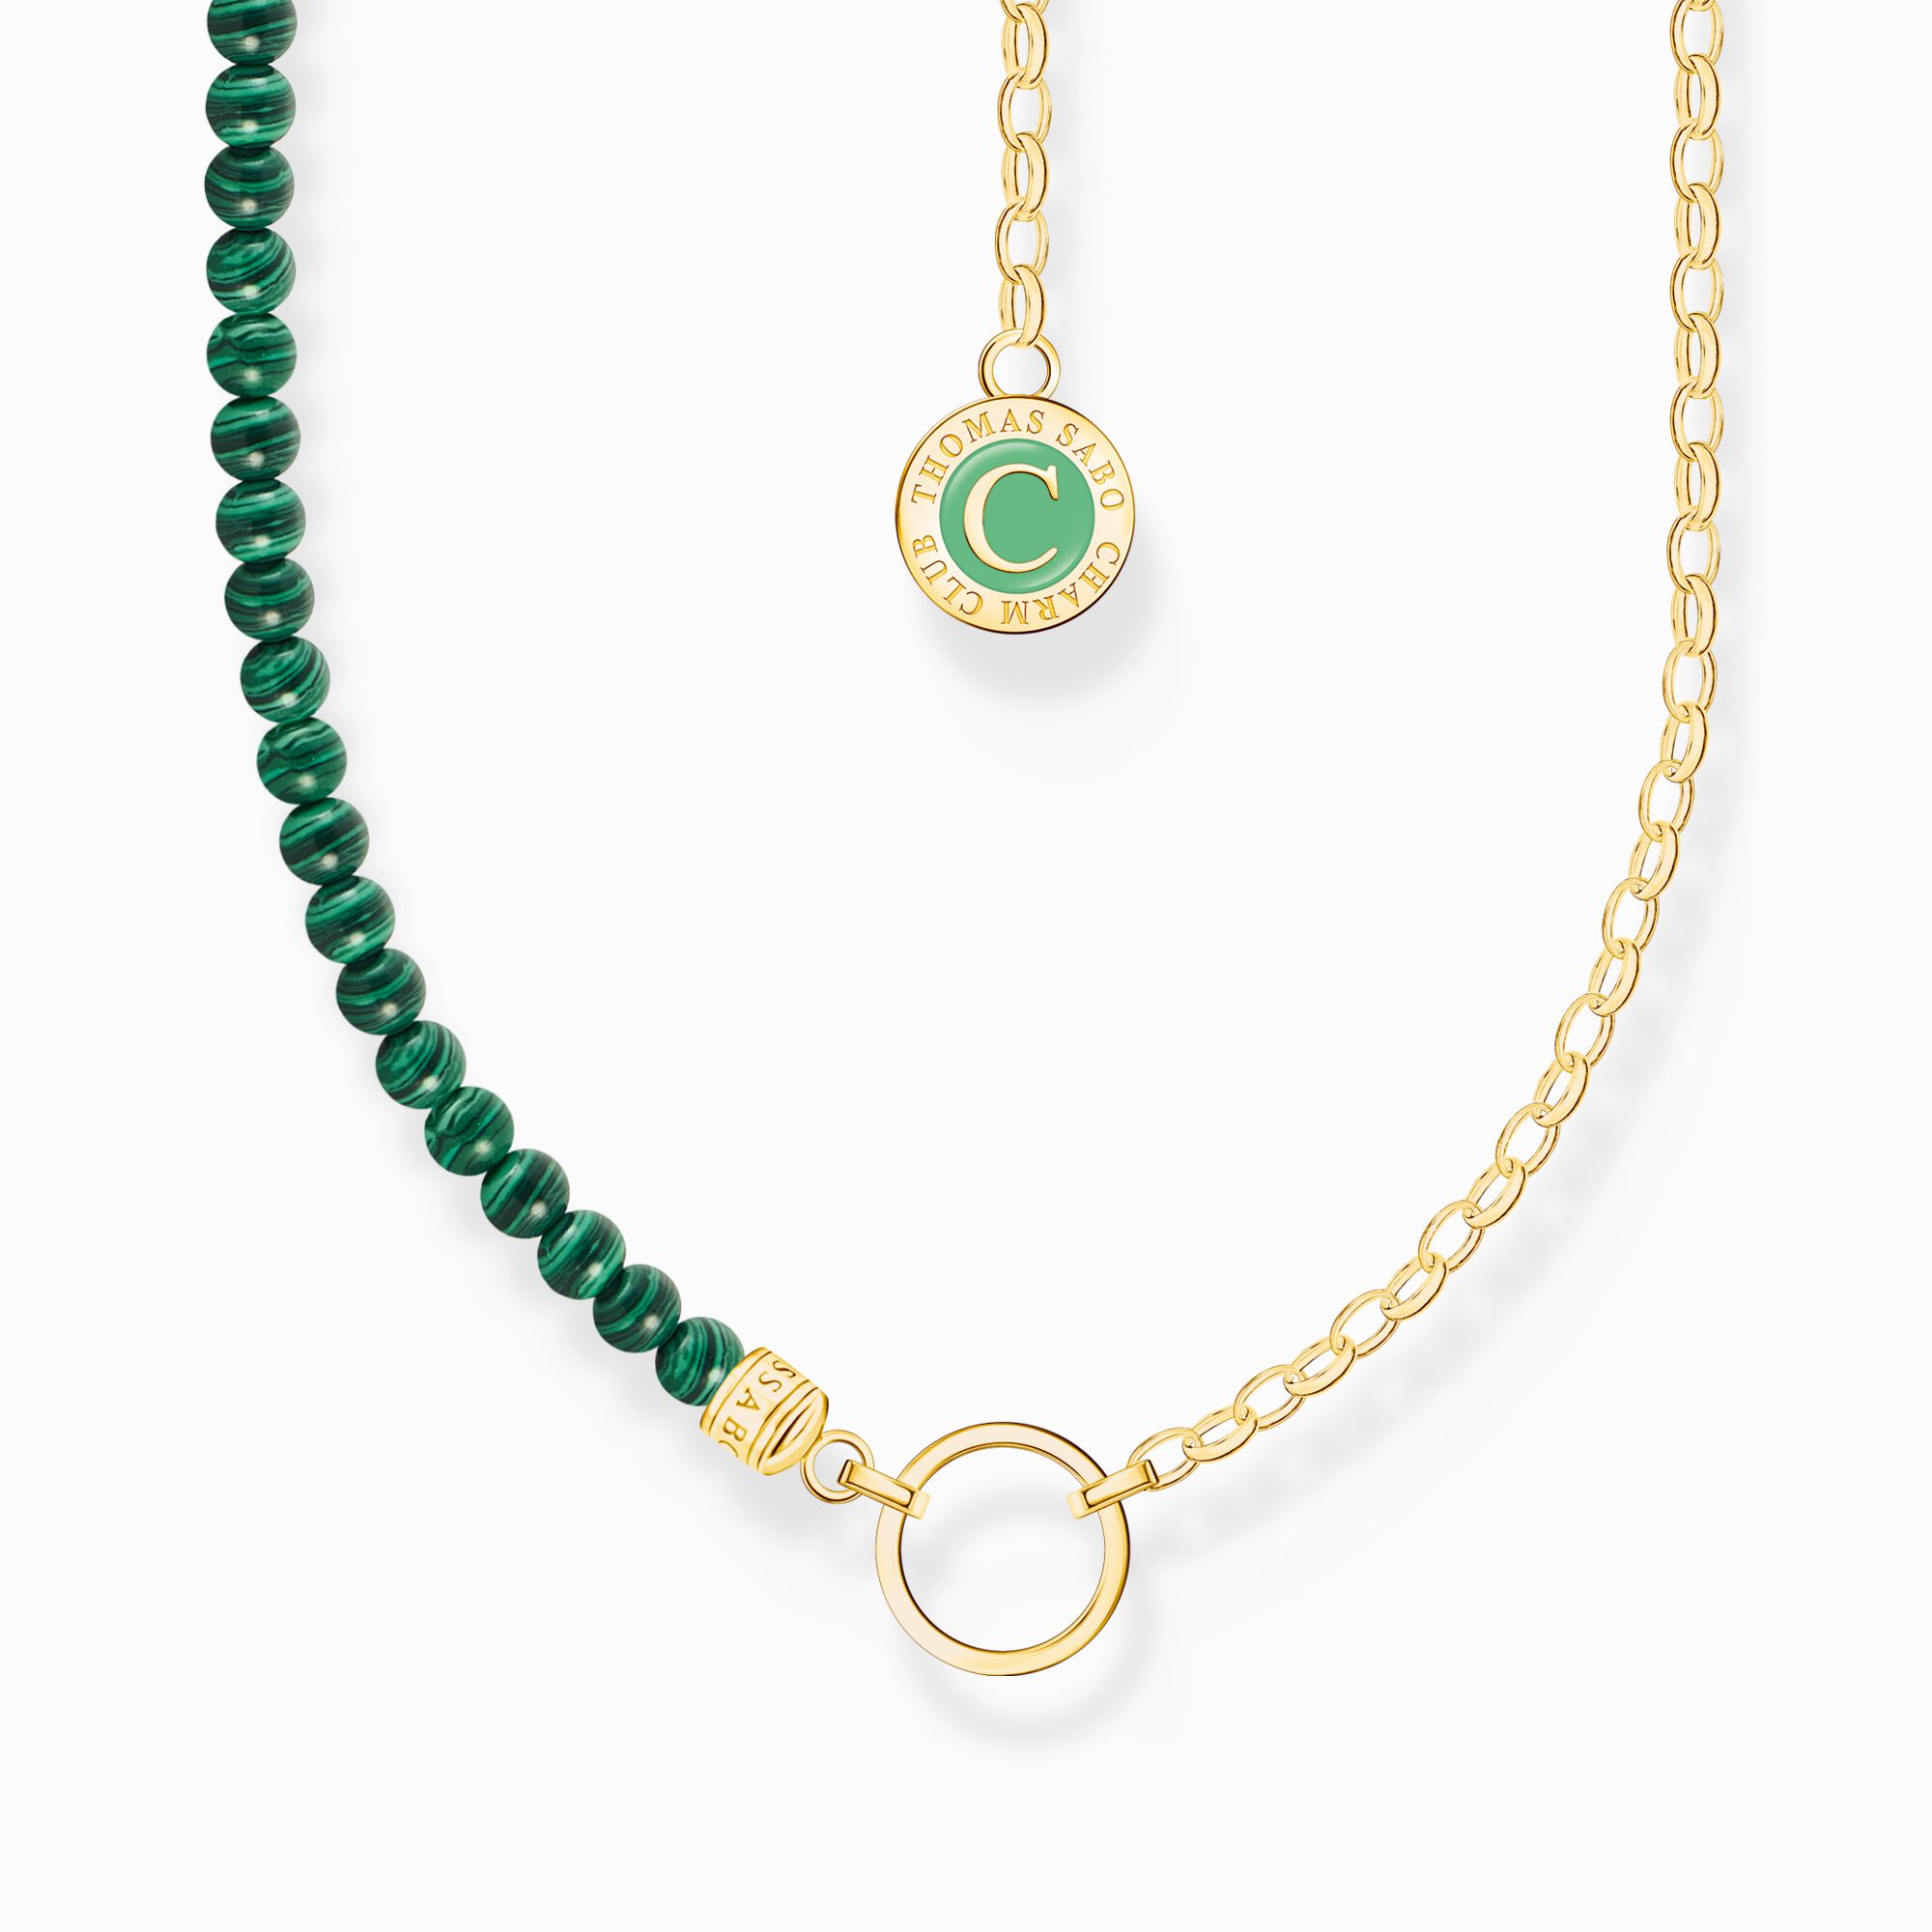 Member Charm necklace with green beads yellow-gold plated from the Charm Club collection in the THOMAS SABO online store